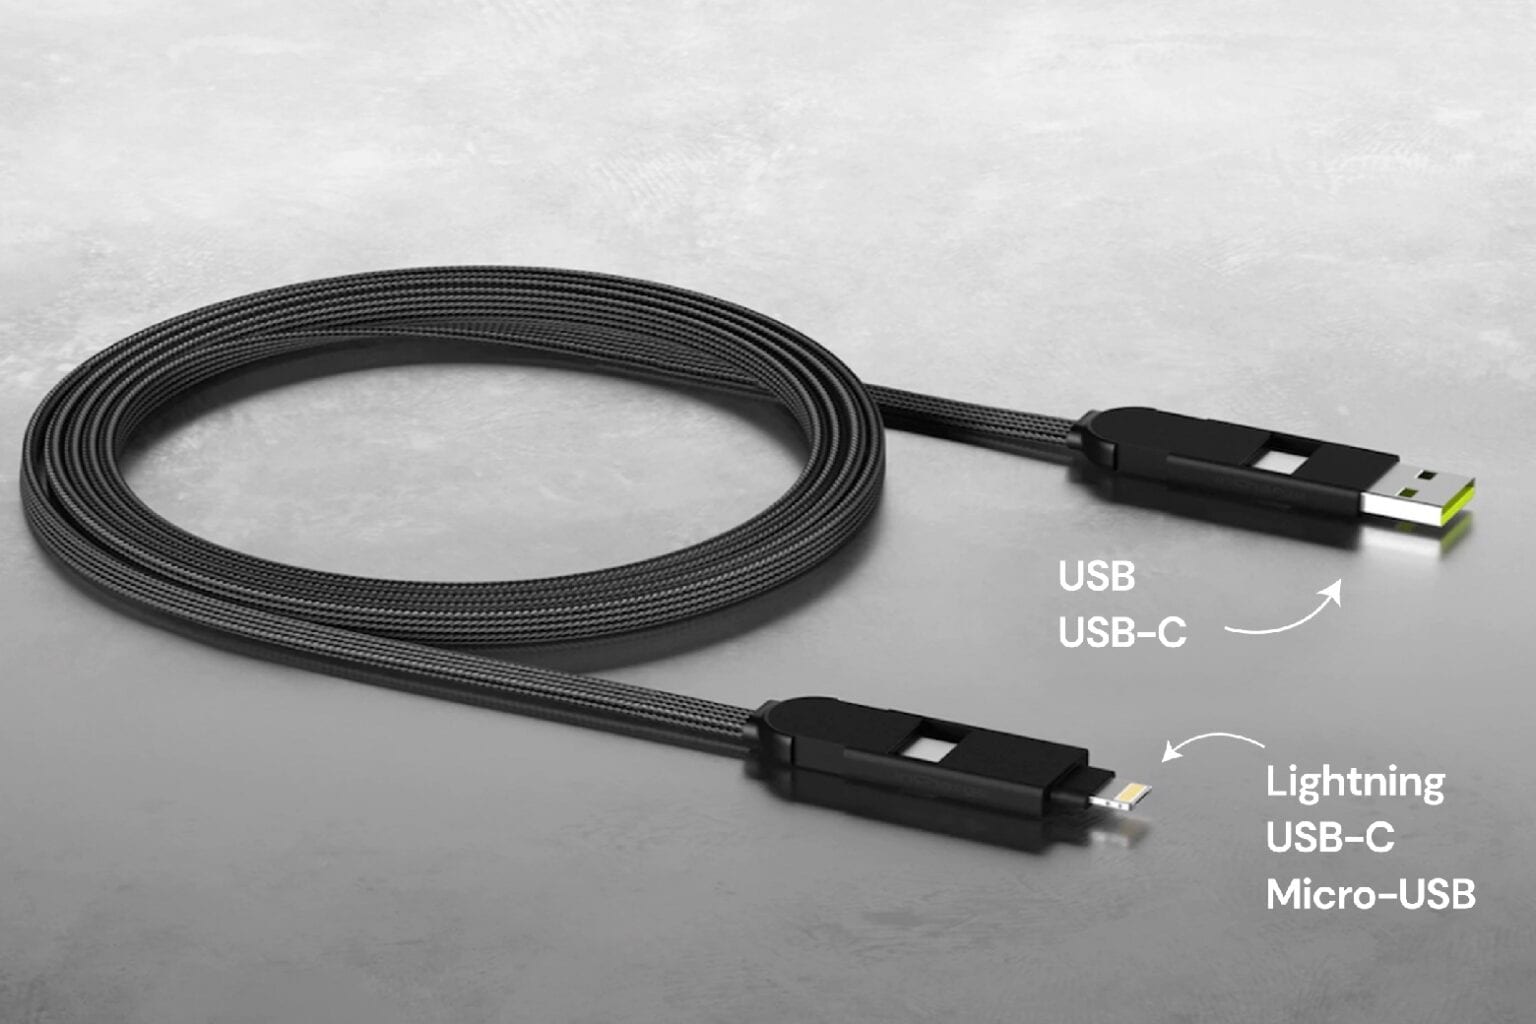 Don't wait for Black Friday to get this Apple-compatible 6-in-1 charging cable, now only $17.